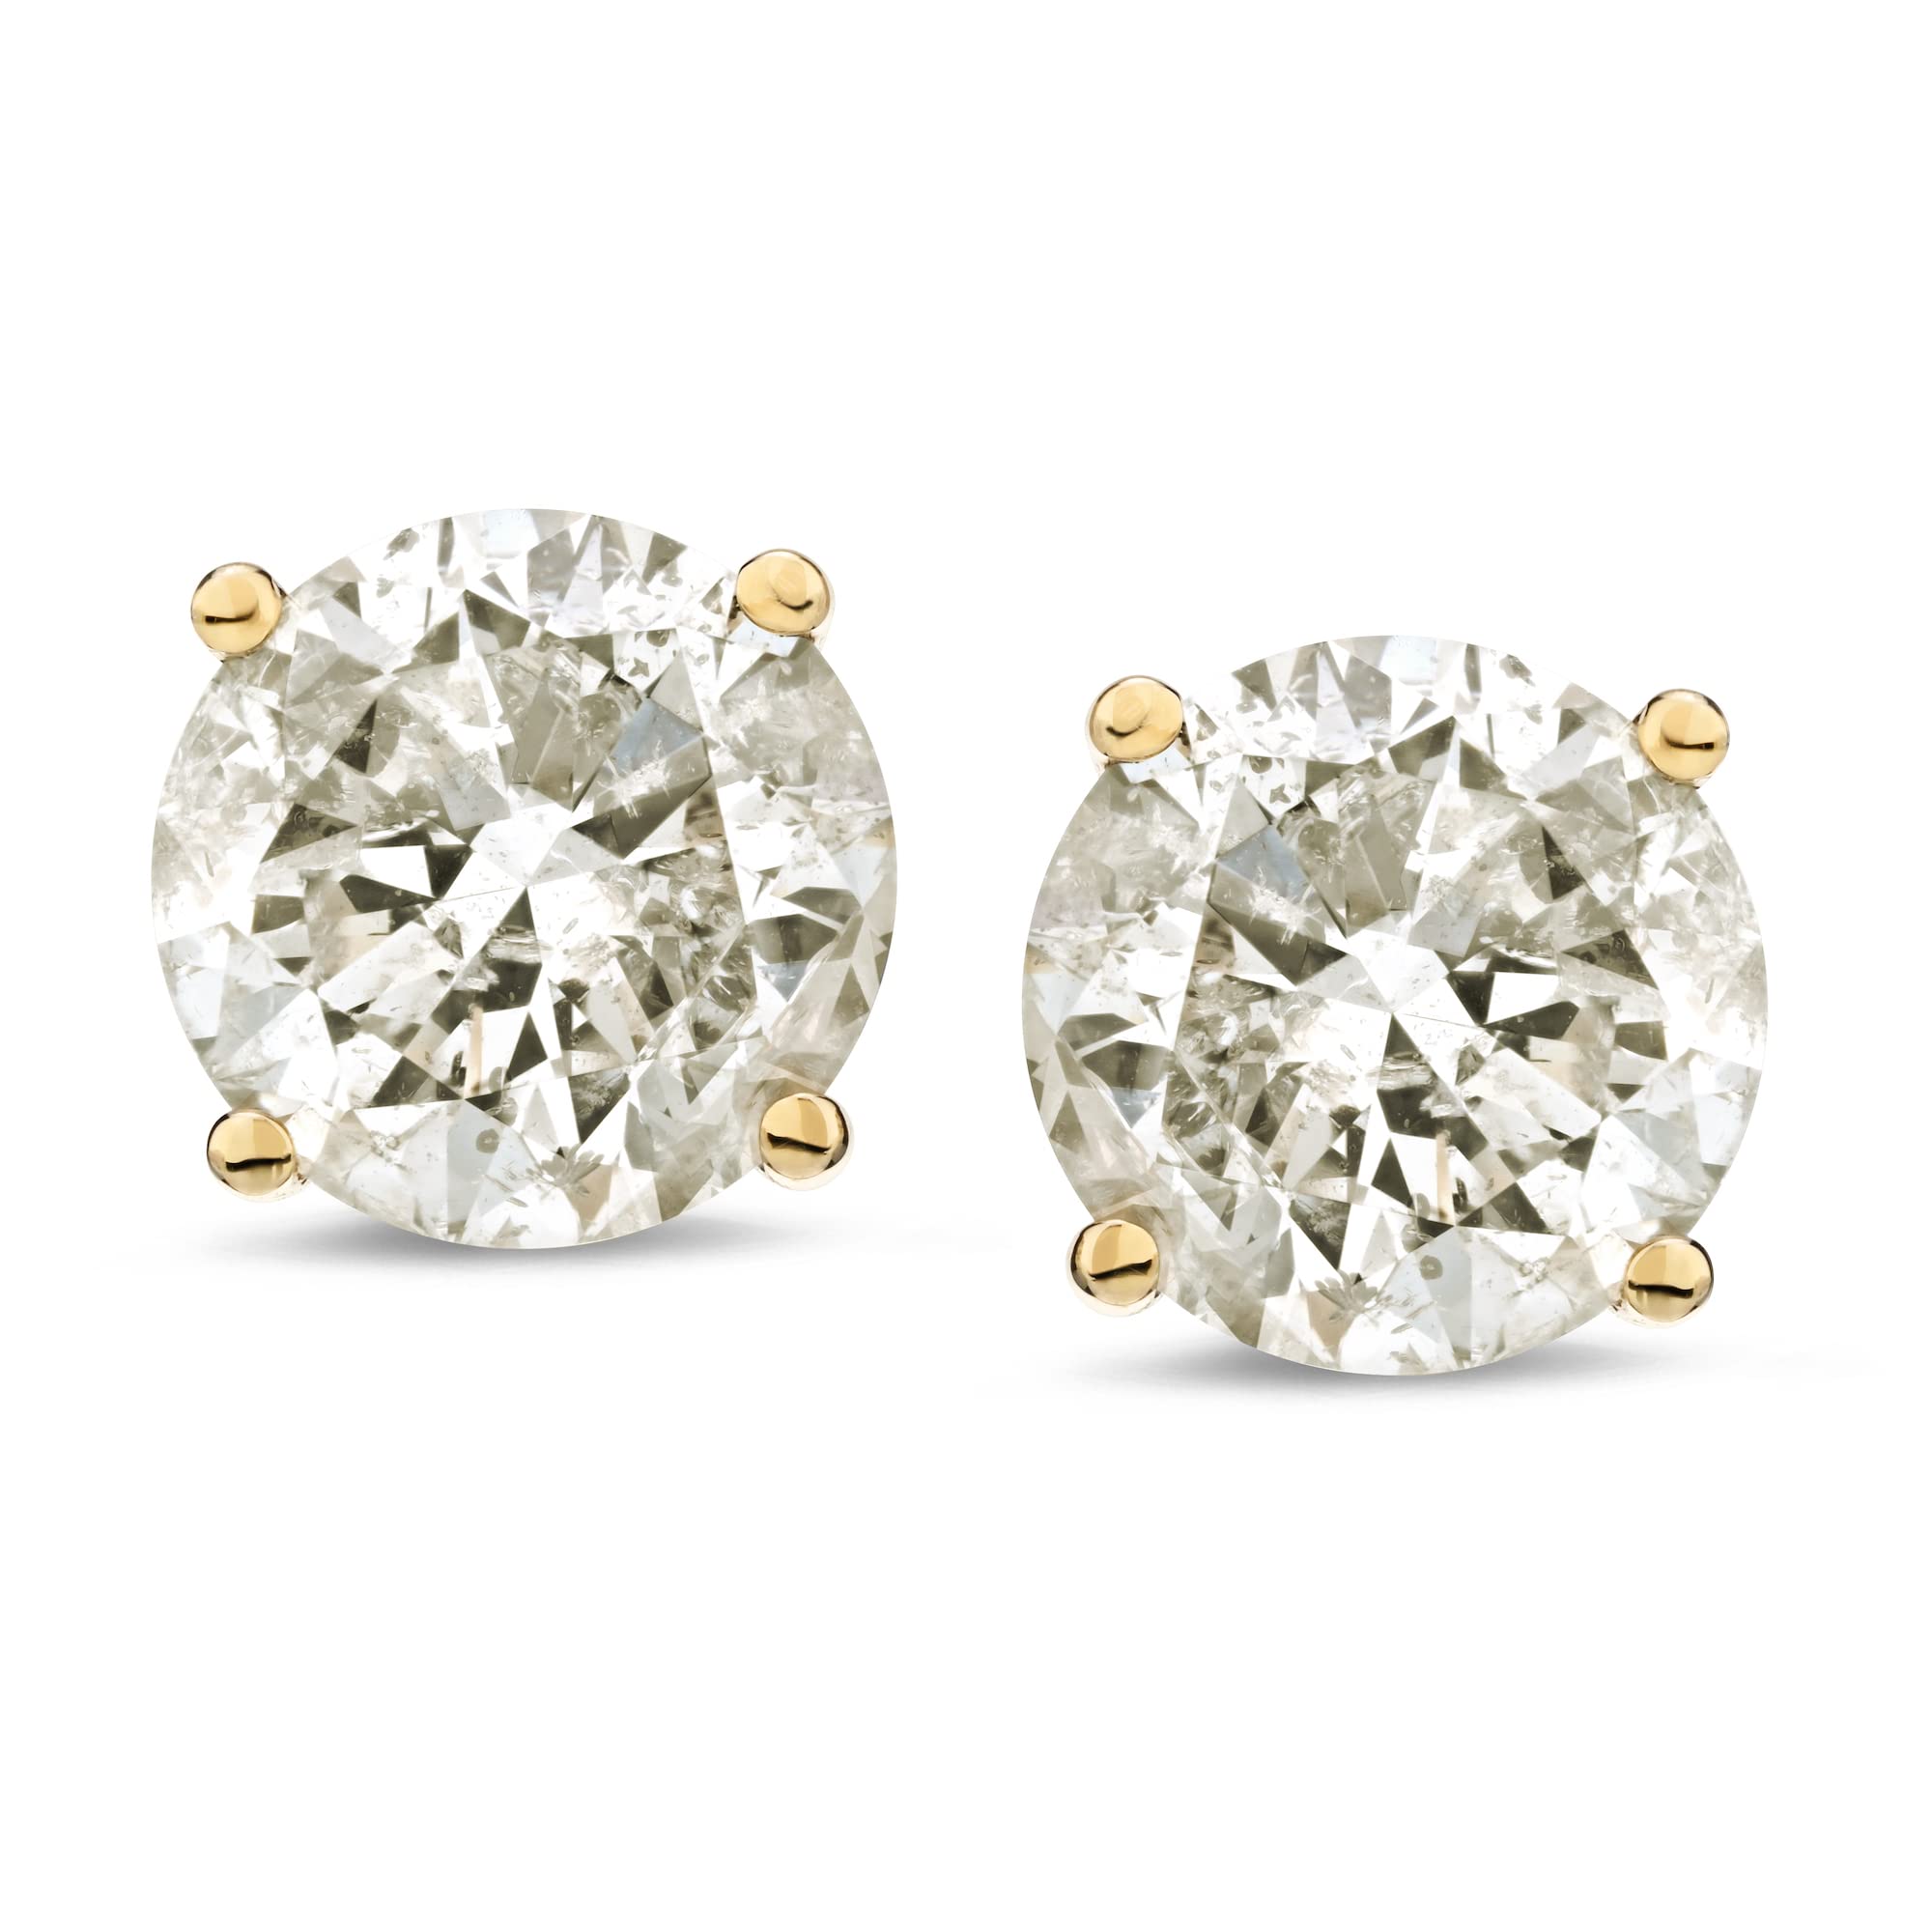 Amazon Collection 14K Gold Round-Cut Diamond Stud Earrings (1/4-2 cttw, J-K Color, I2-I3 Clarity)